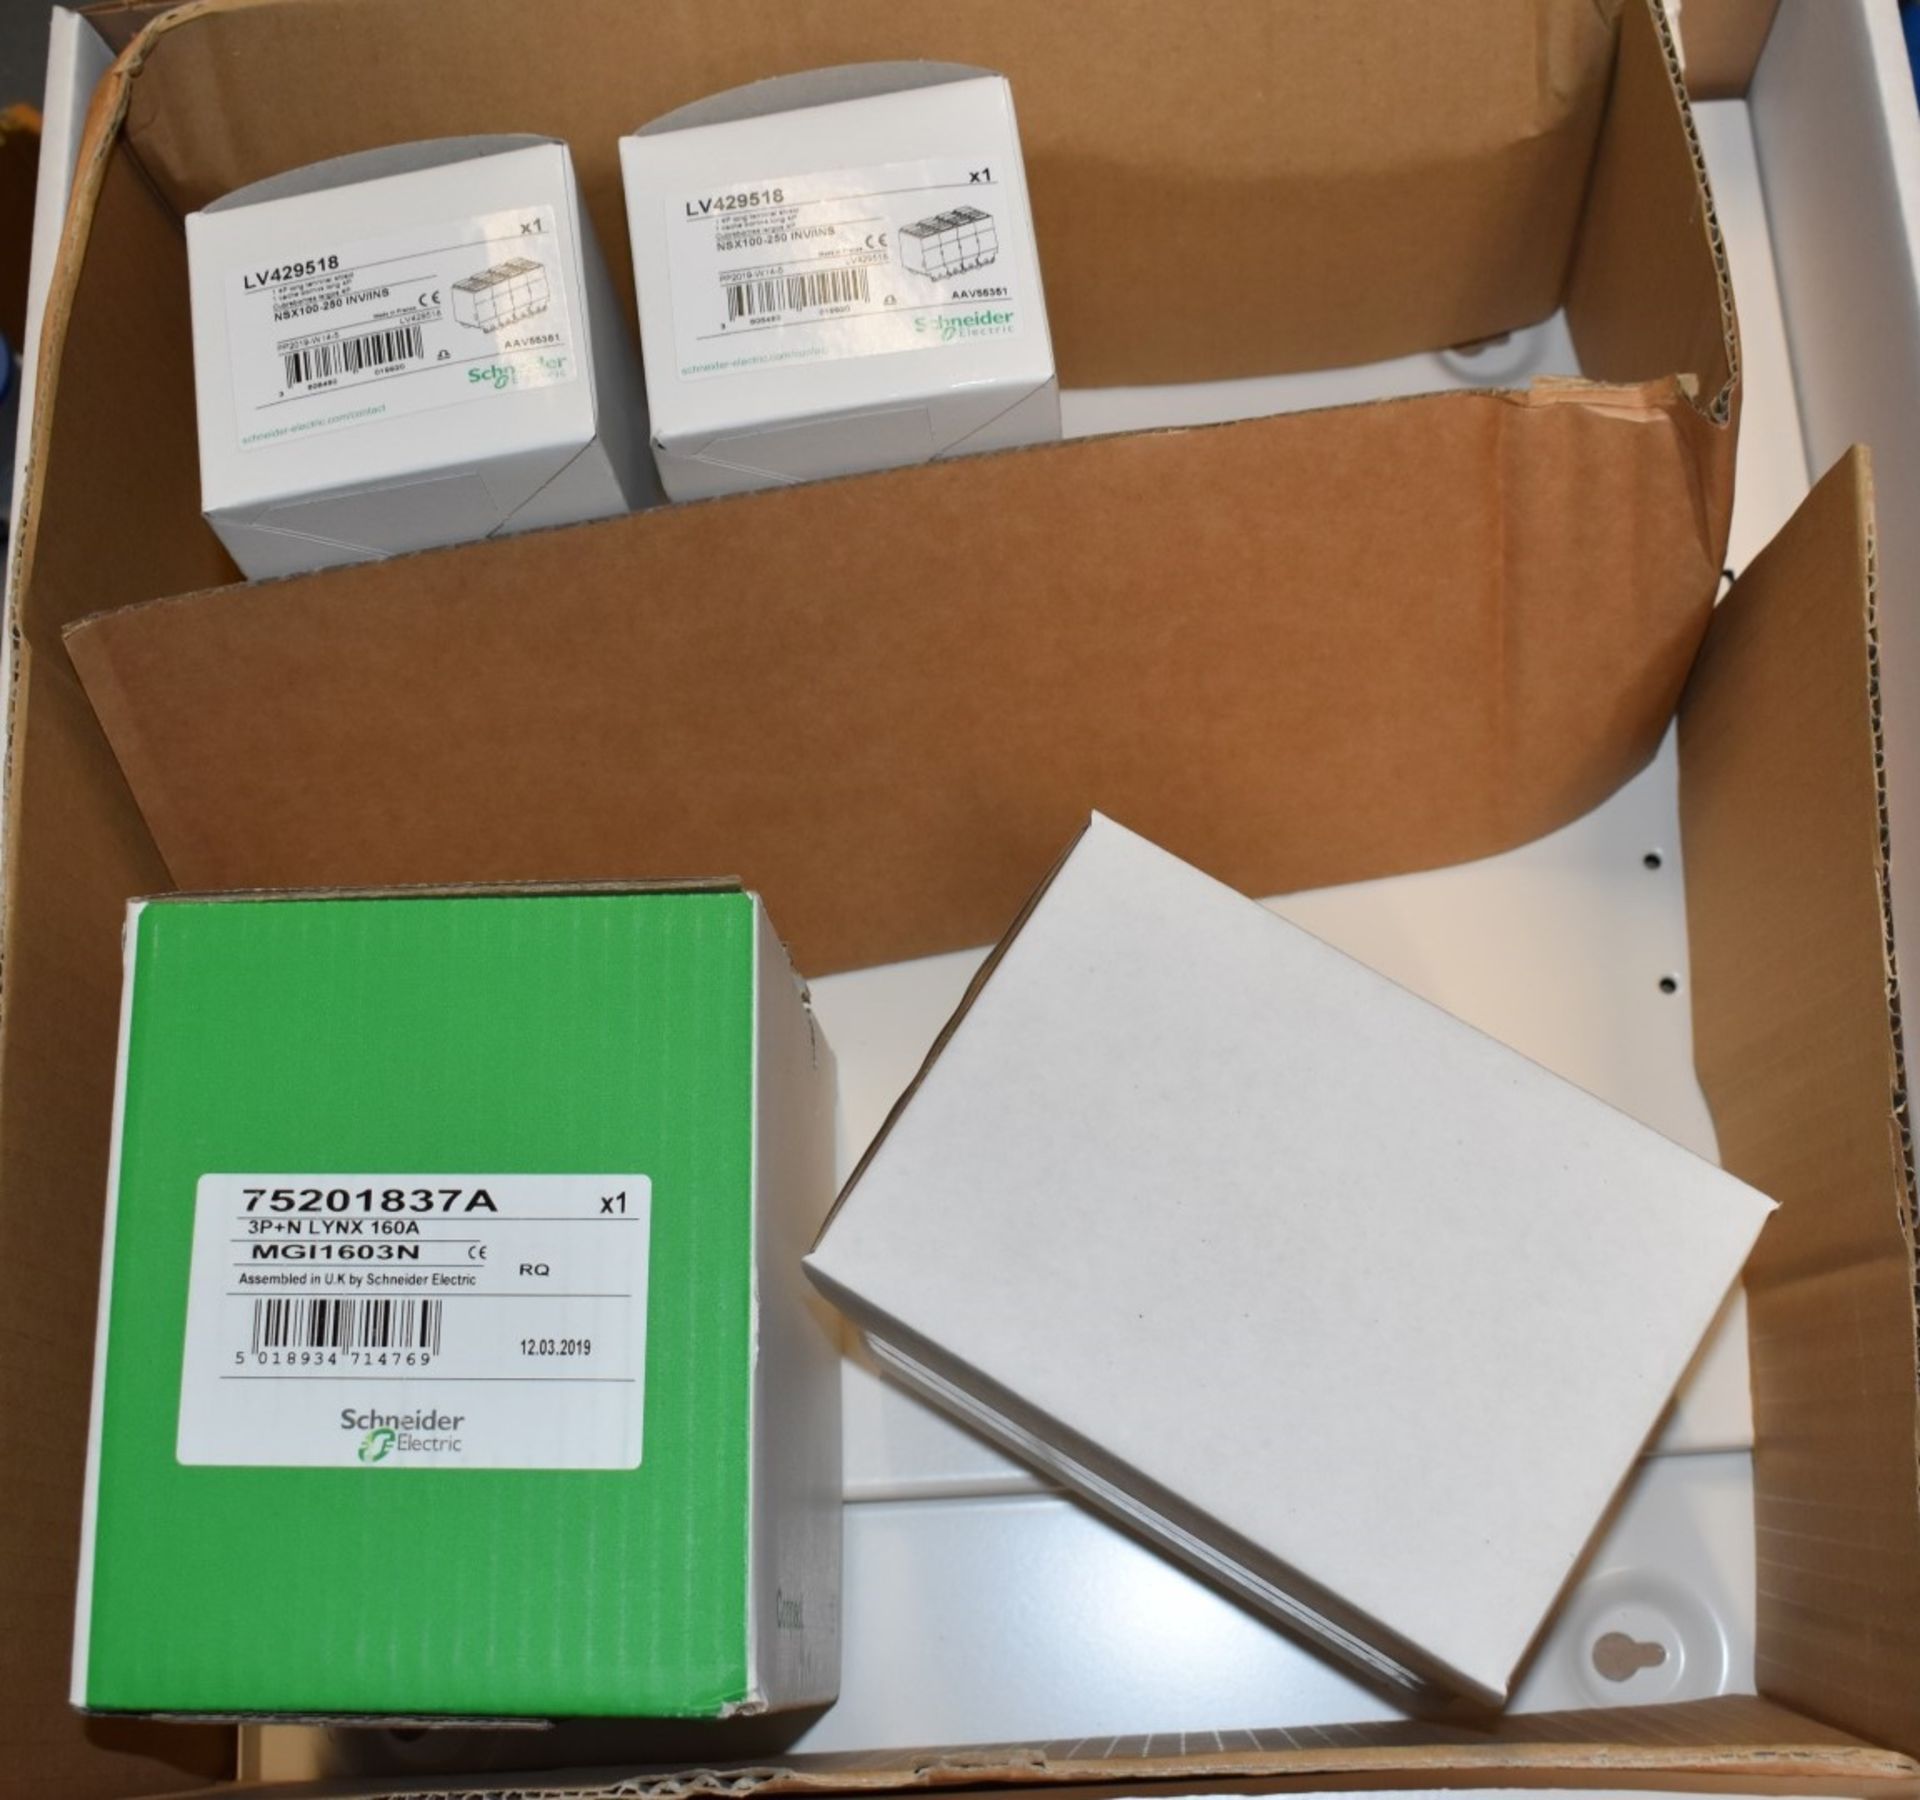 1 x Schneider Acti9 Isobar Incoming Extension Box Kit With 160A 3P+N Switch Disconnector SEA9NI1603 - Image 5 of 7